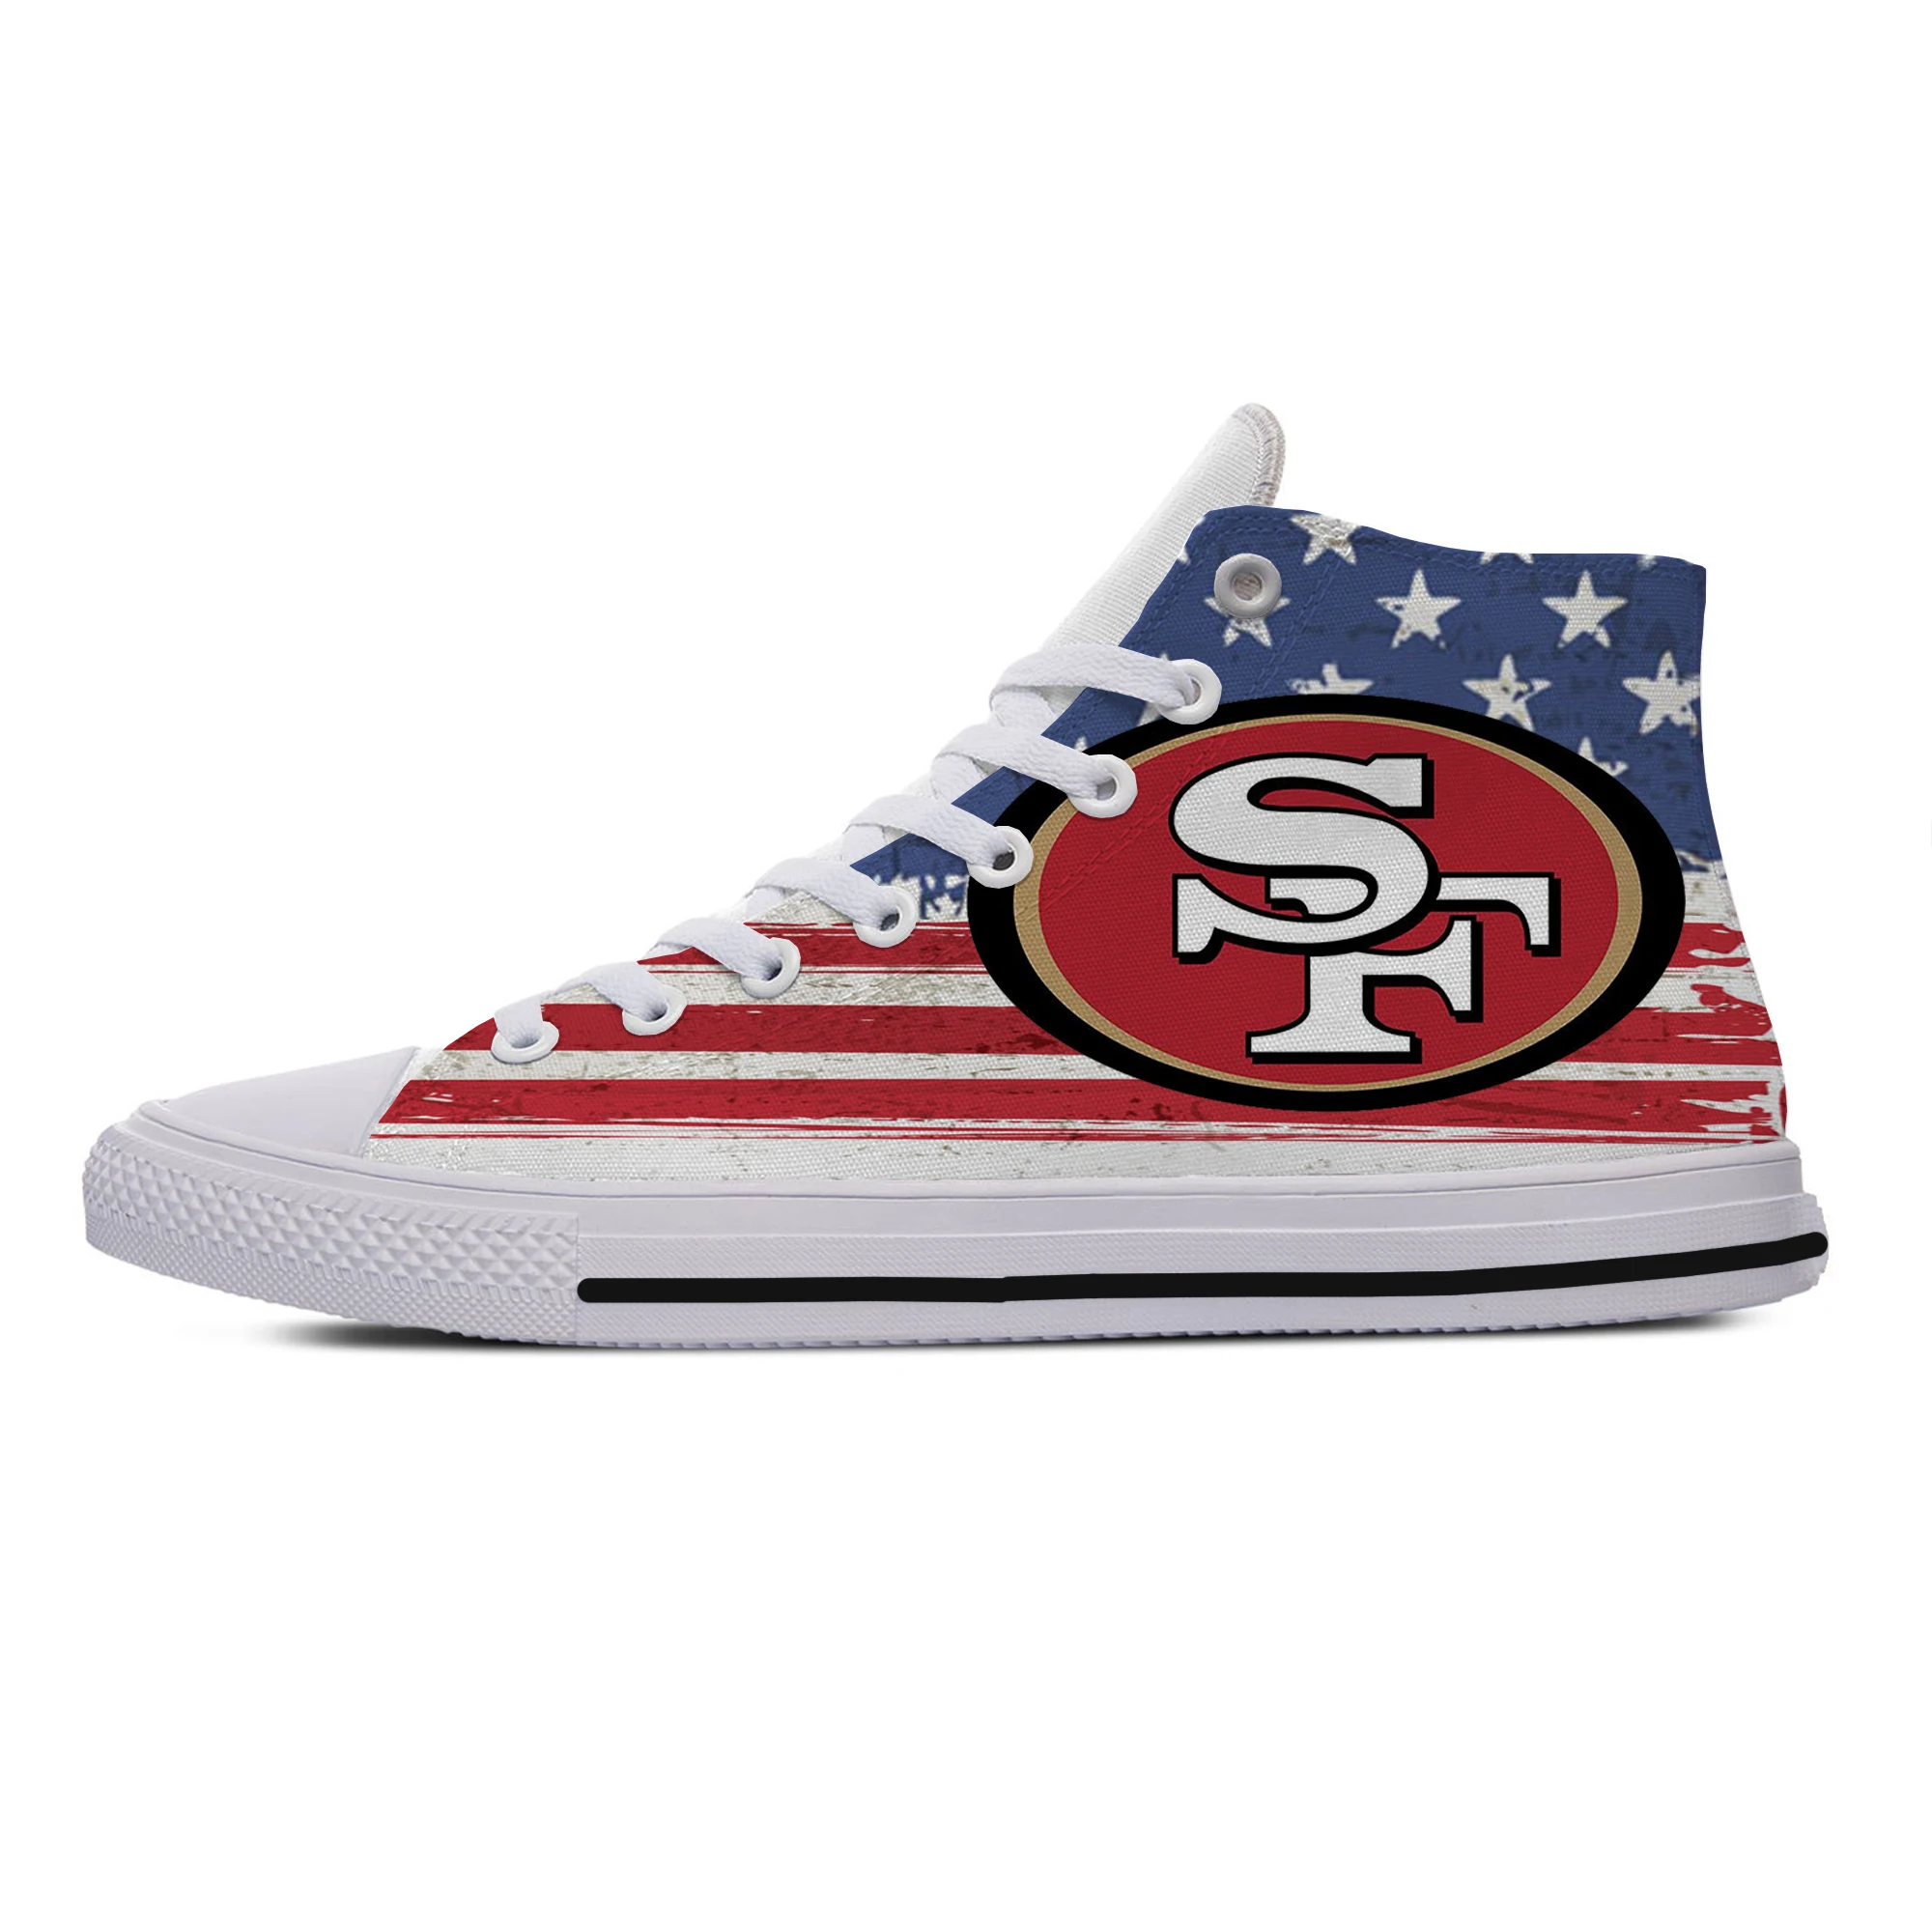 

Zapatillas De Deporte Pattern 49ers Imges For San Francisco Fans Running Shoes Lightweight And Stylish Sport Shoes